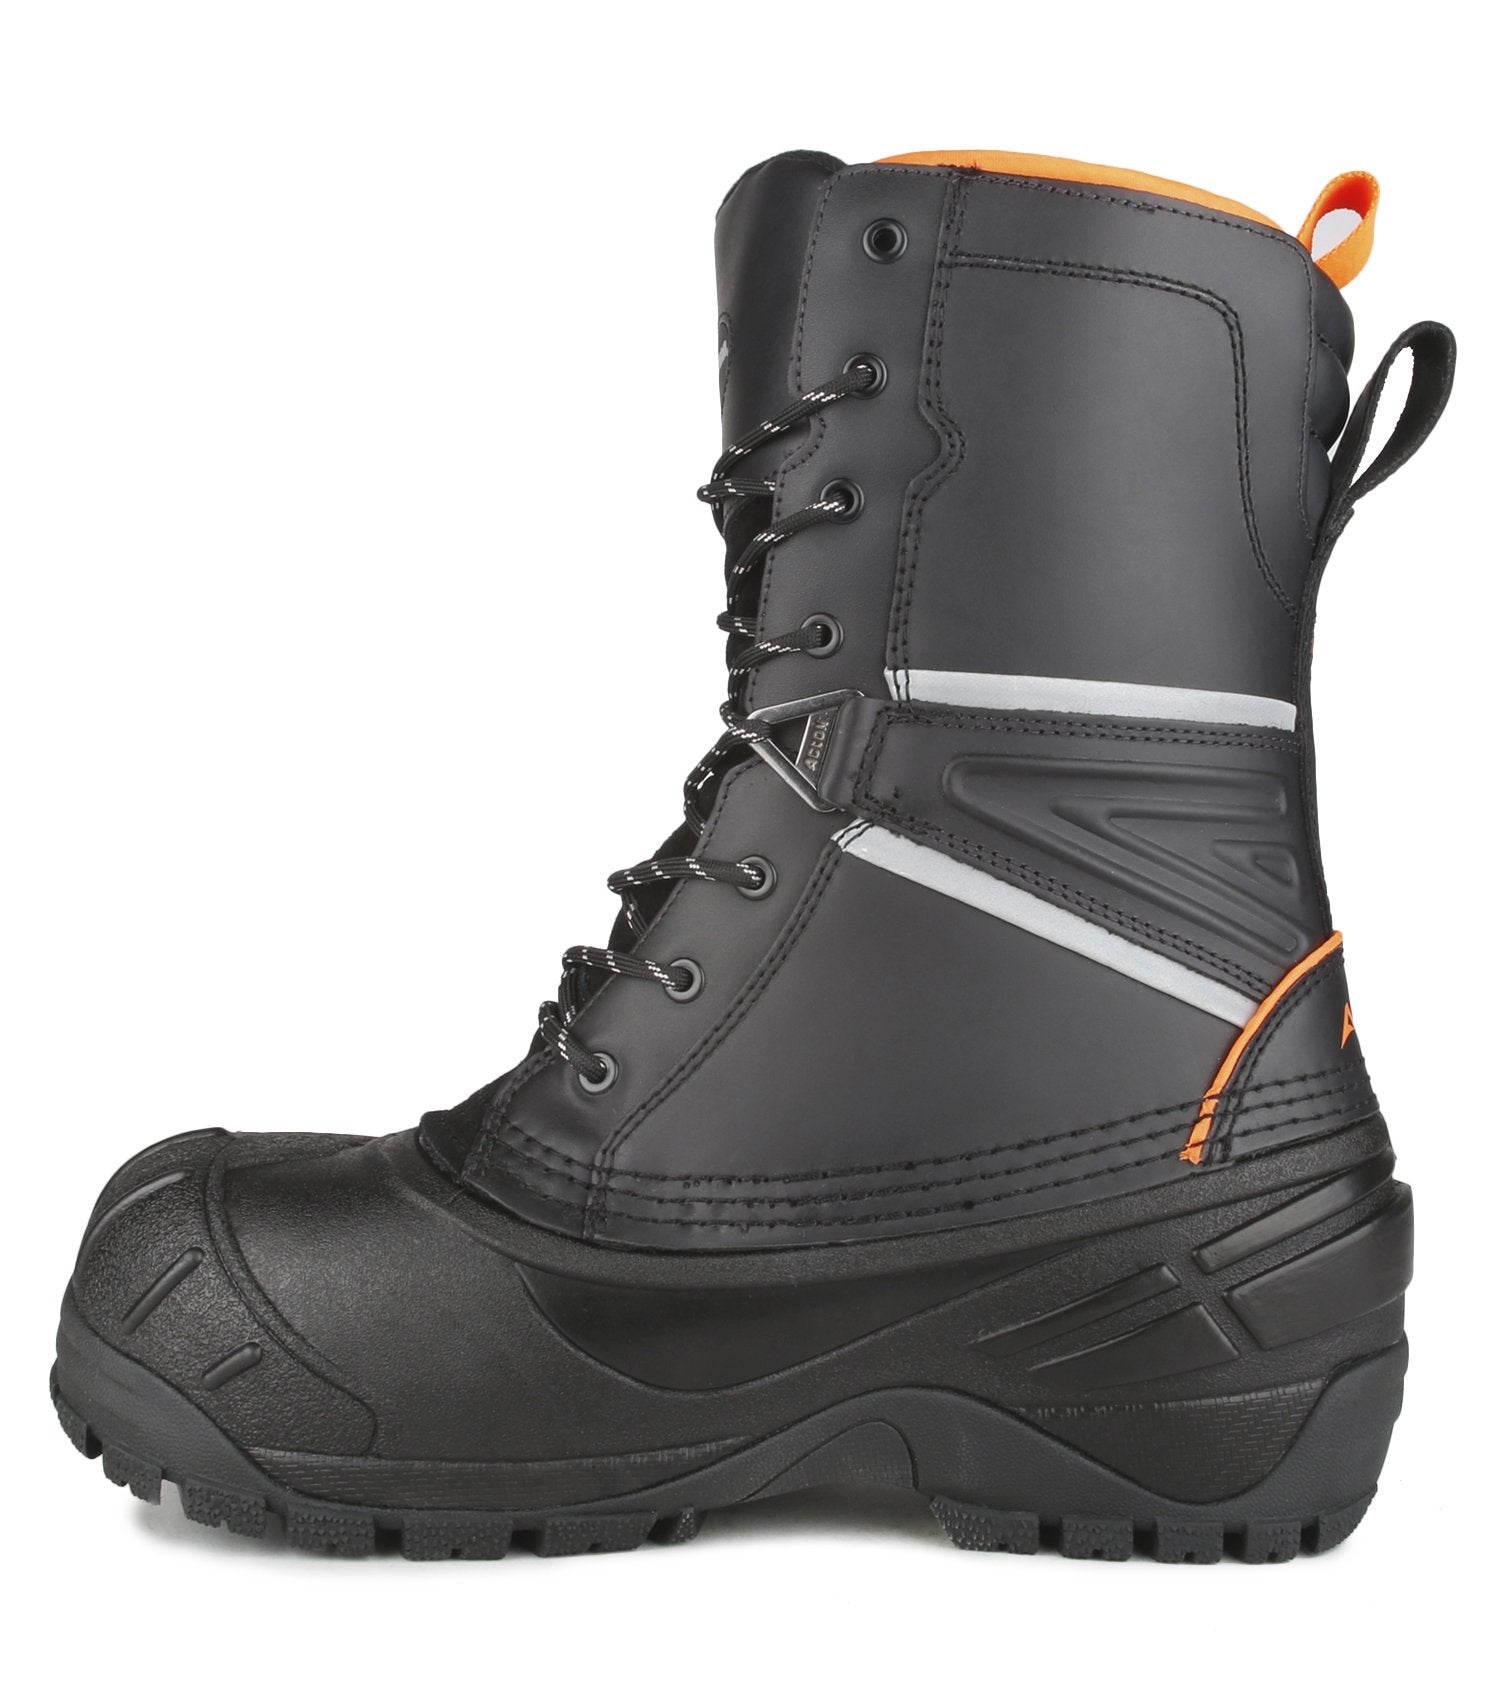 Acton Fighter 12" Men's Composite Toe Winter Safety Work Boots | -75°C/-103°F Rated | Sizes 4 - 14 Work Boots - Cleanflow